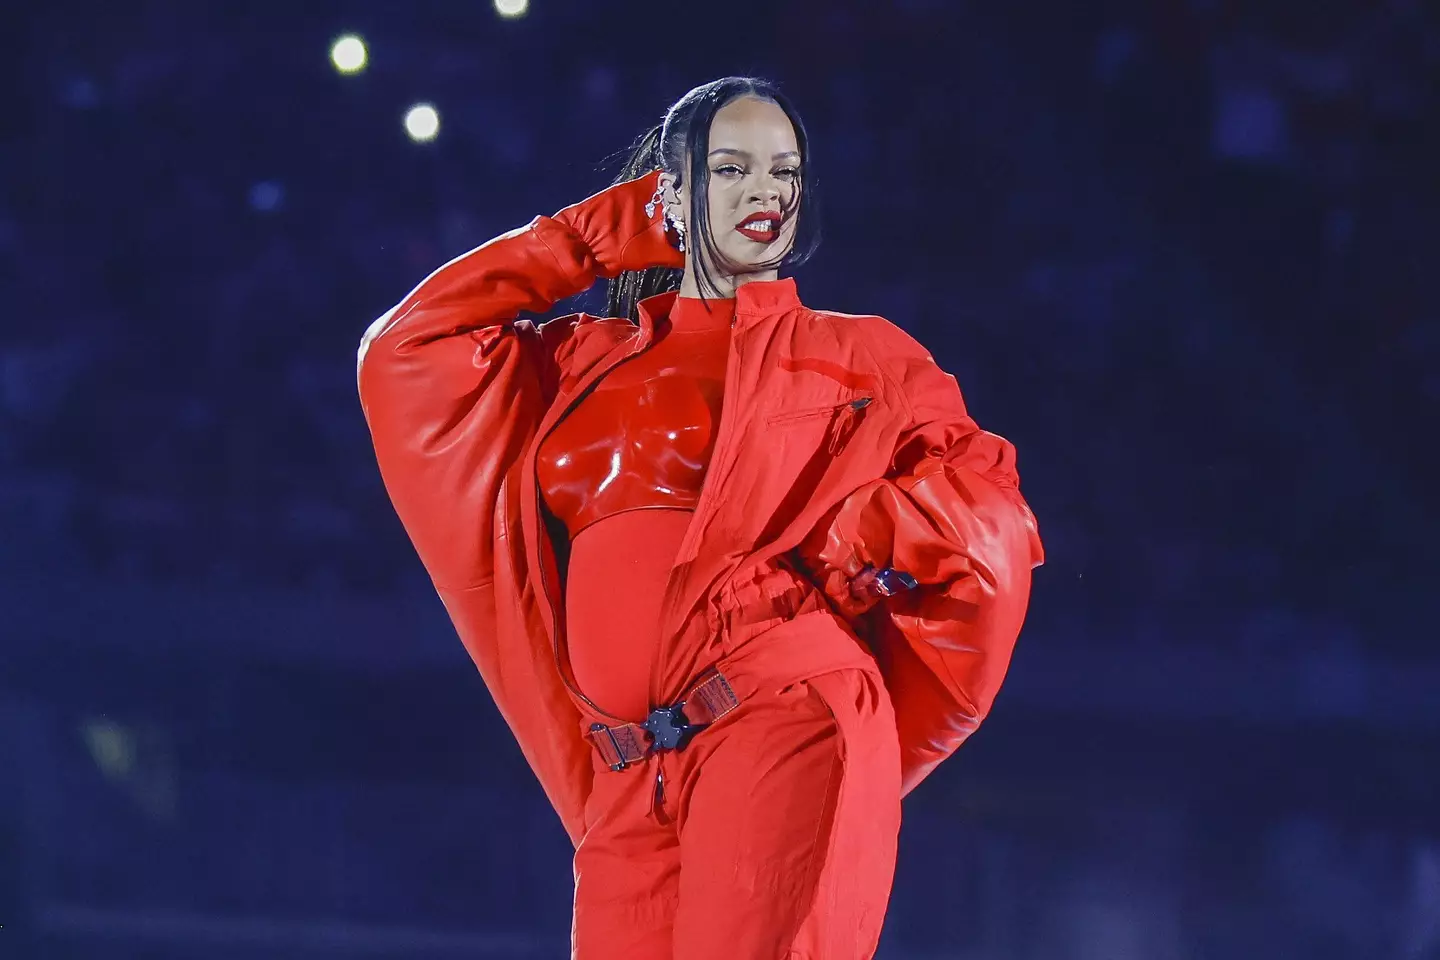 Rihanna flaunting her baby bump at the Super Bowl halftime show.